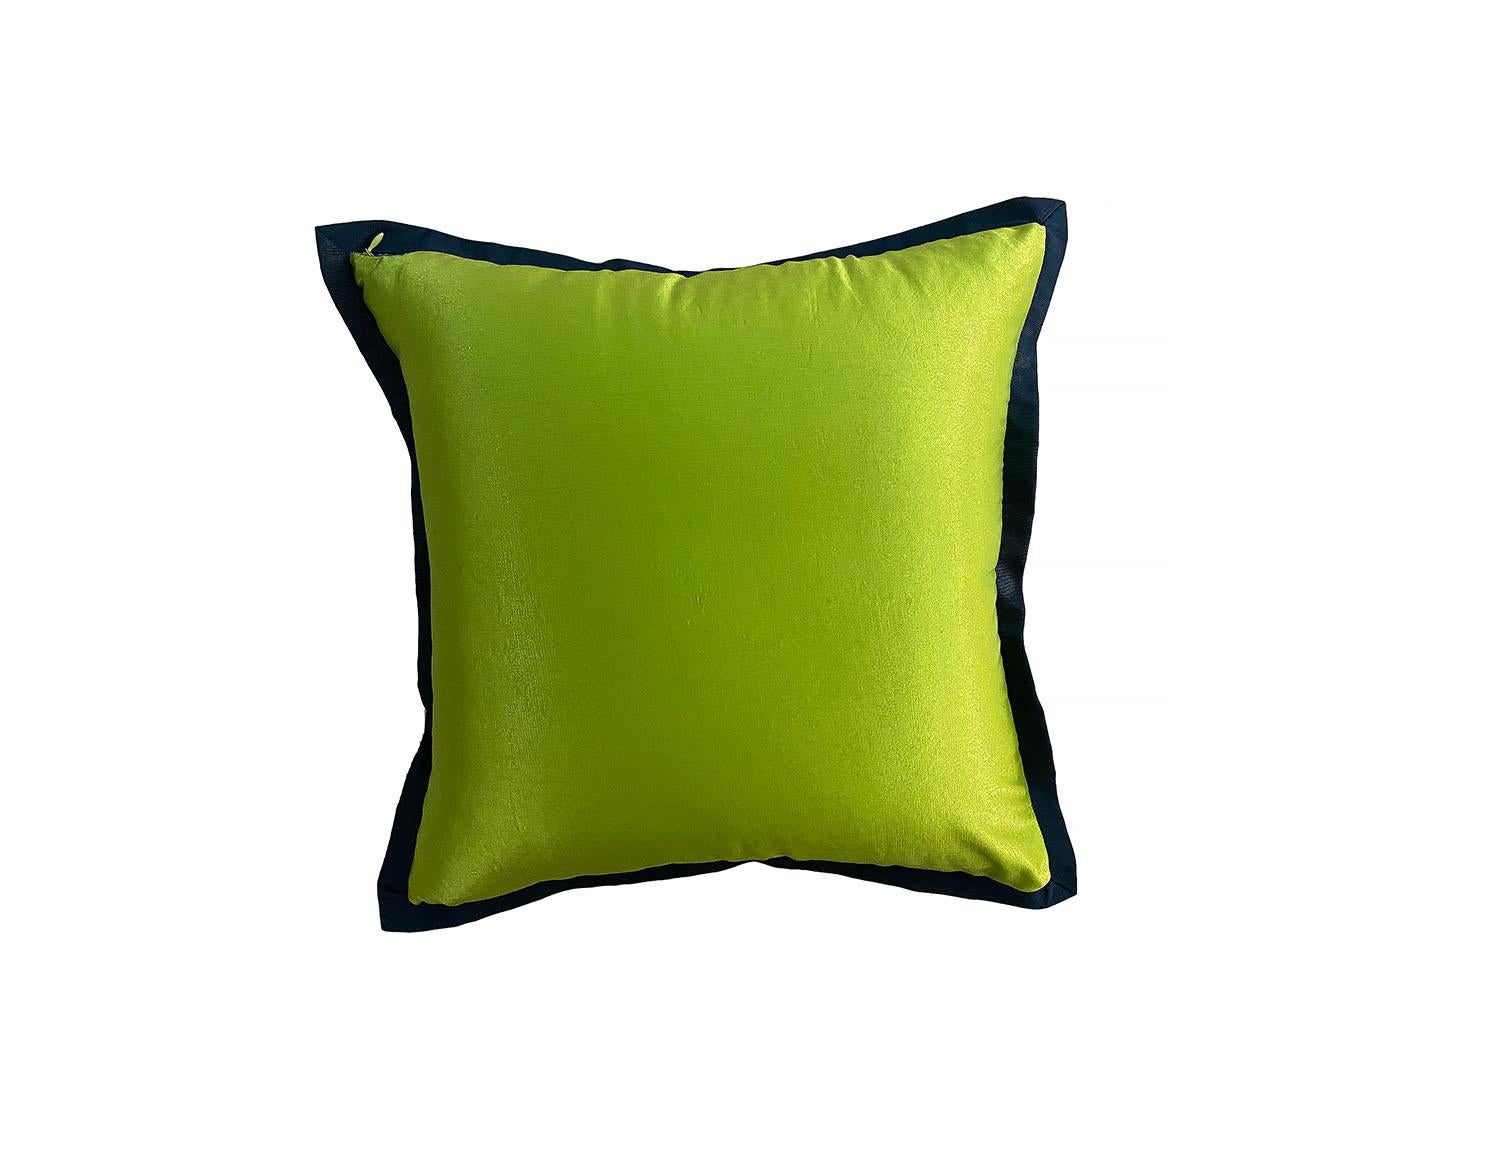 Delightfully artistic and luxurious, this silk velvet pillow is dyed with a mix of cornflower blue and green pigments. It is hand-painted with colored pastes in shades of green with white undertones. Embellished with gold leaf details. This